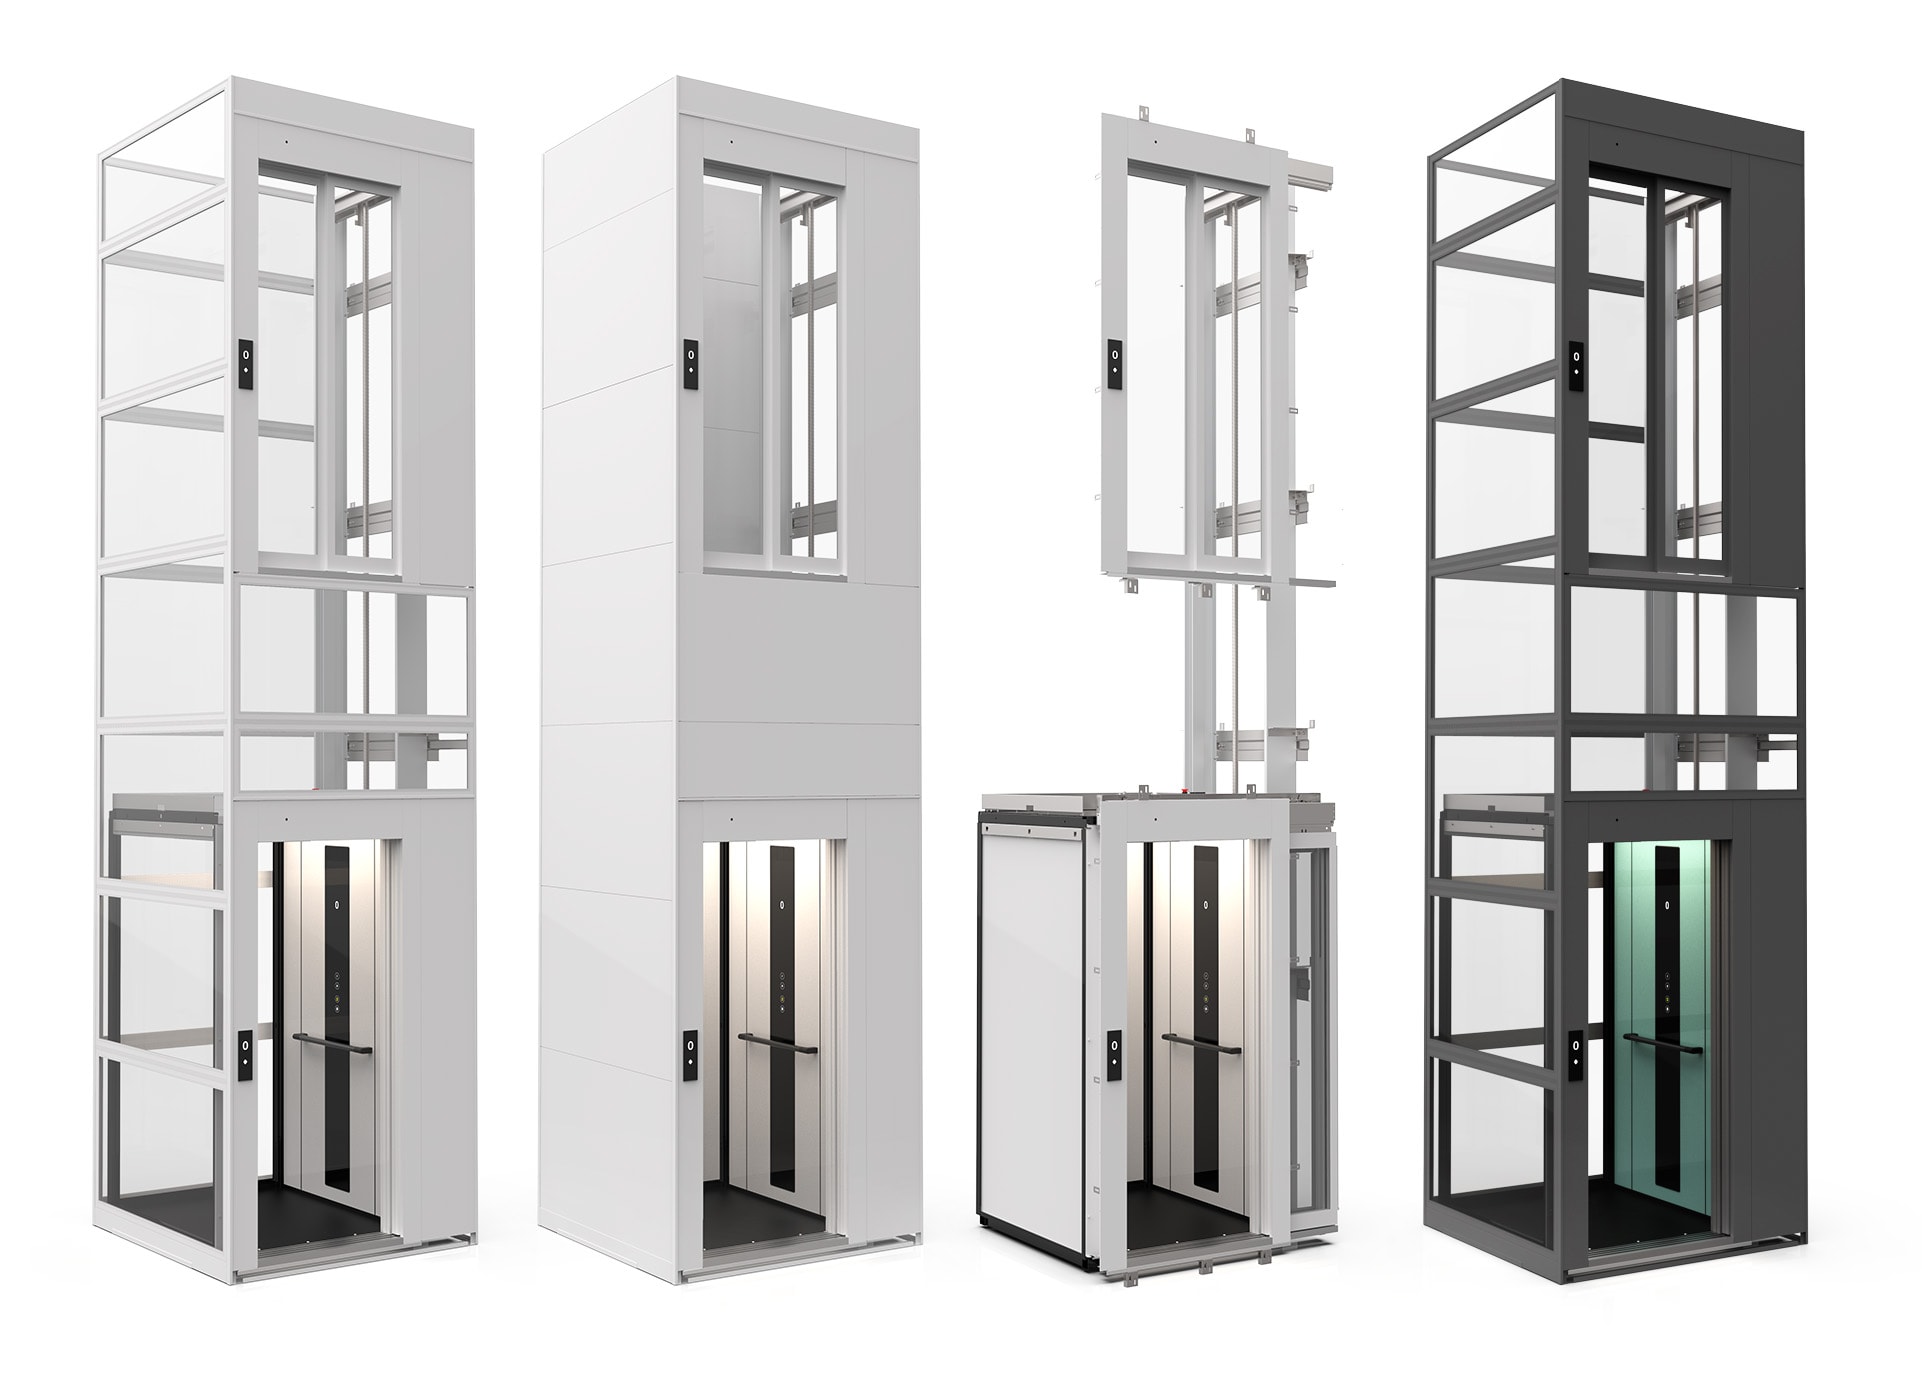 Product visualization of a cabin lift